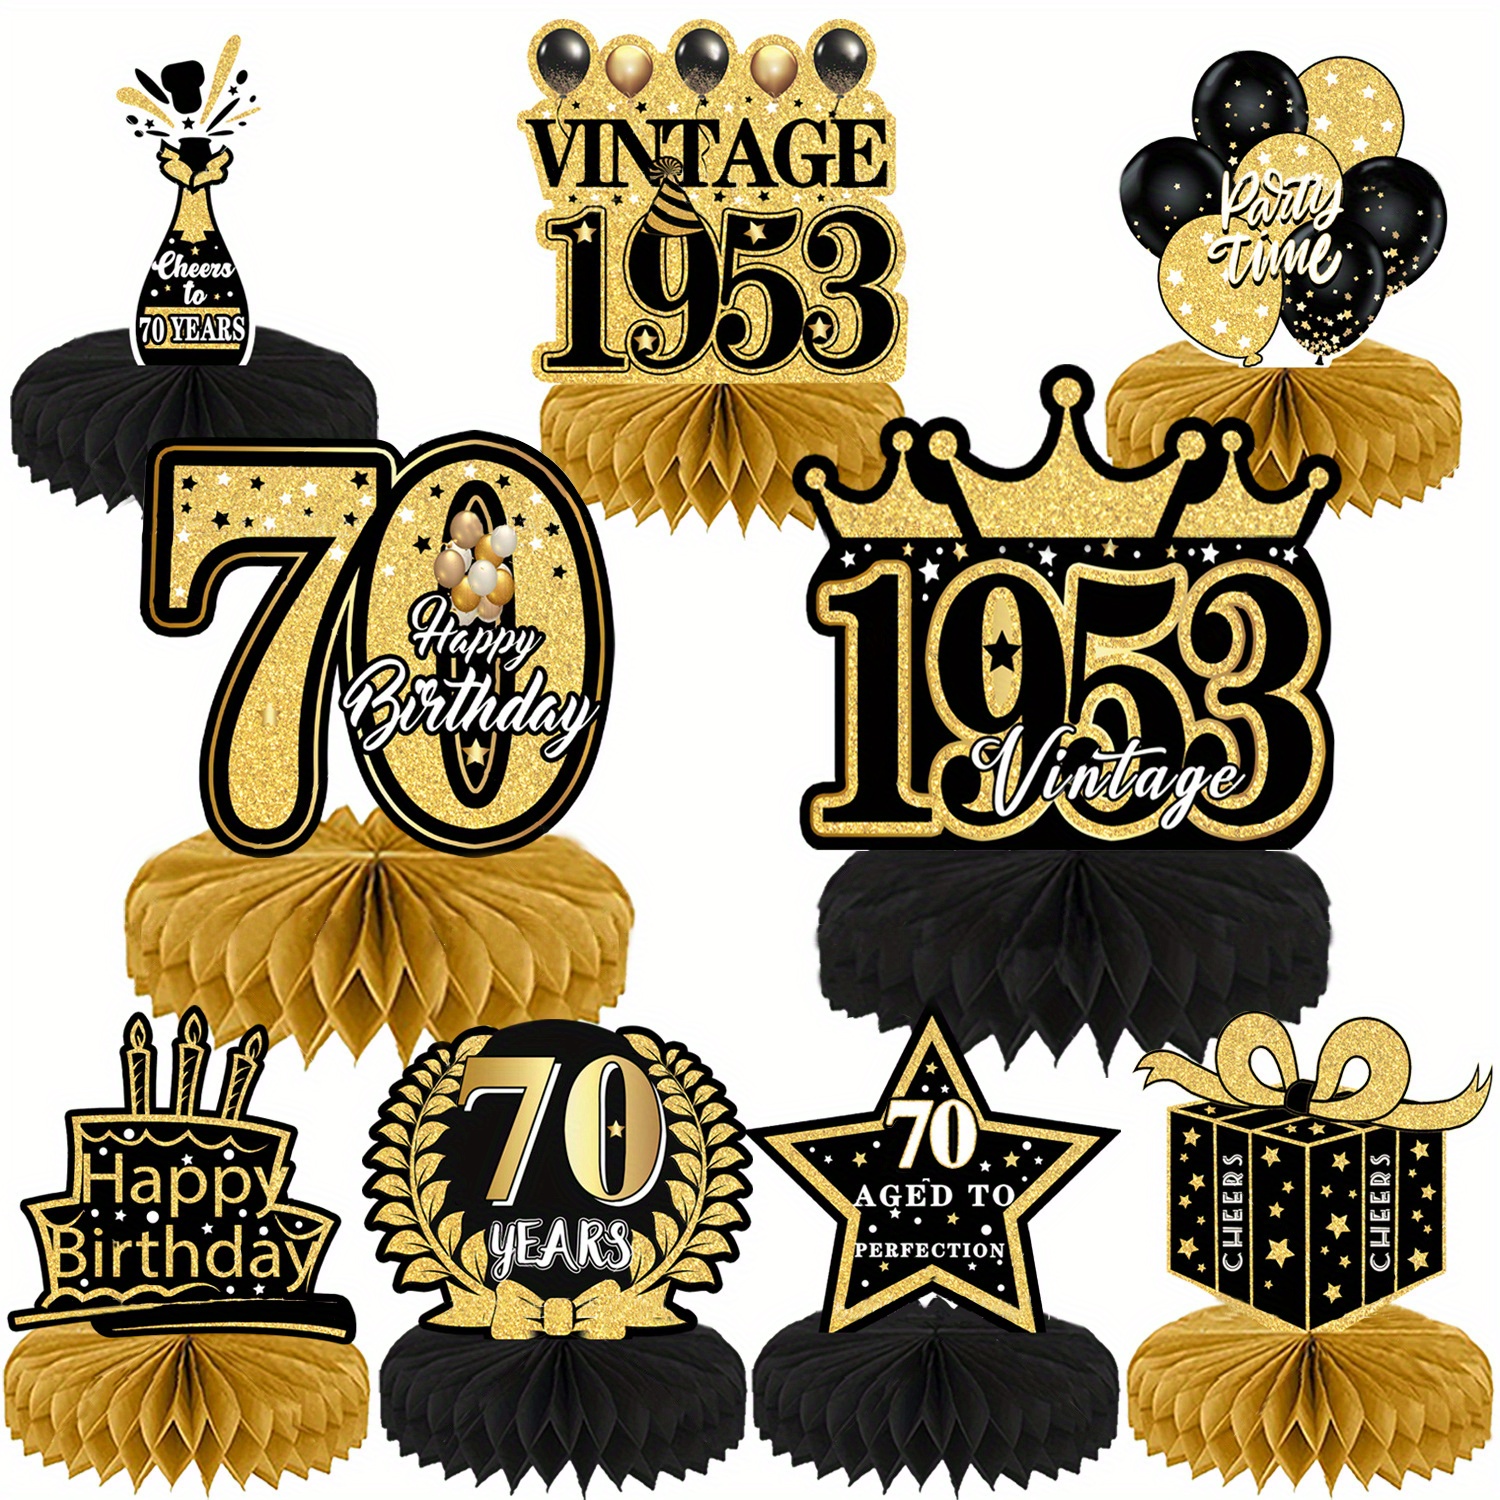 50th birthday party  Black and gold party decorations, Birthday party  decorations, White party decorations